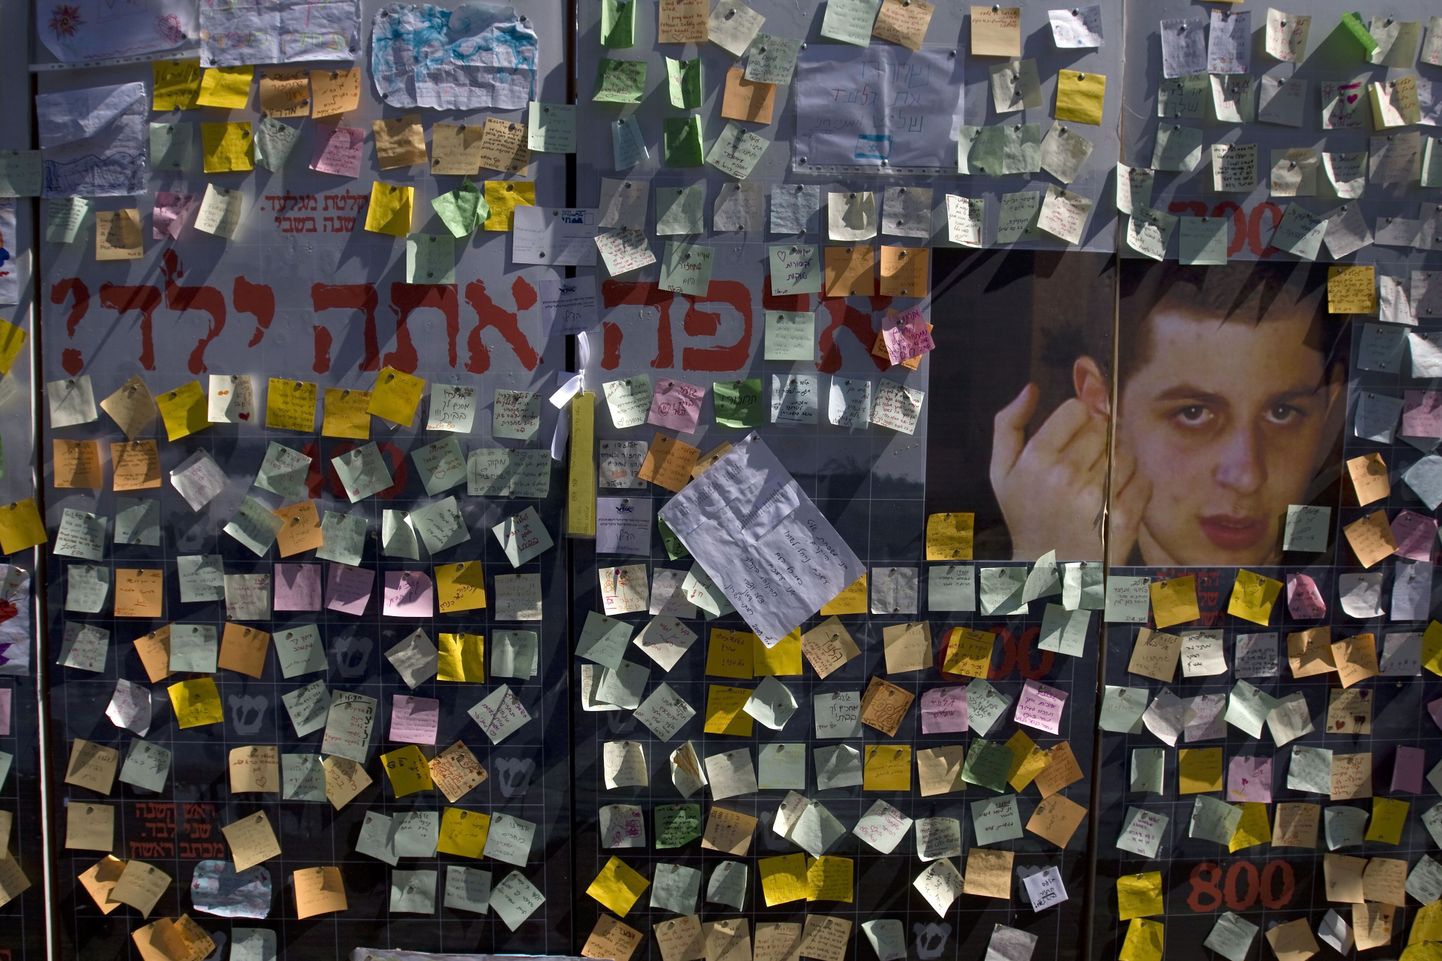 A mural with messages for captured Israeli soldier Gilad Shalit hangs near a protest tent calling for Shalit's release set up in front of Prime Minister Ehud Olmert's house in Jerusalem on March 17, 2009. The writing in Hebrew reads, ?Where is the kid?. Eleventh-hour talks on an Israel-Hamas prisoner swap appeared to collapse as both sides accused each other of about-turns and bad faith during the Egyptian-brokered efforts. The crunch negotiations had aimed to secure the release of Israeli soldier Gilad Shalit, seized by Gaza militants in June 2006, in exchange for the freeing of hundreds of Palestinian prisoners.     AFP PHOTO/YOAV LEMMER